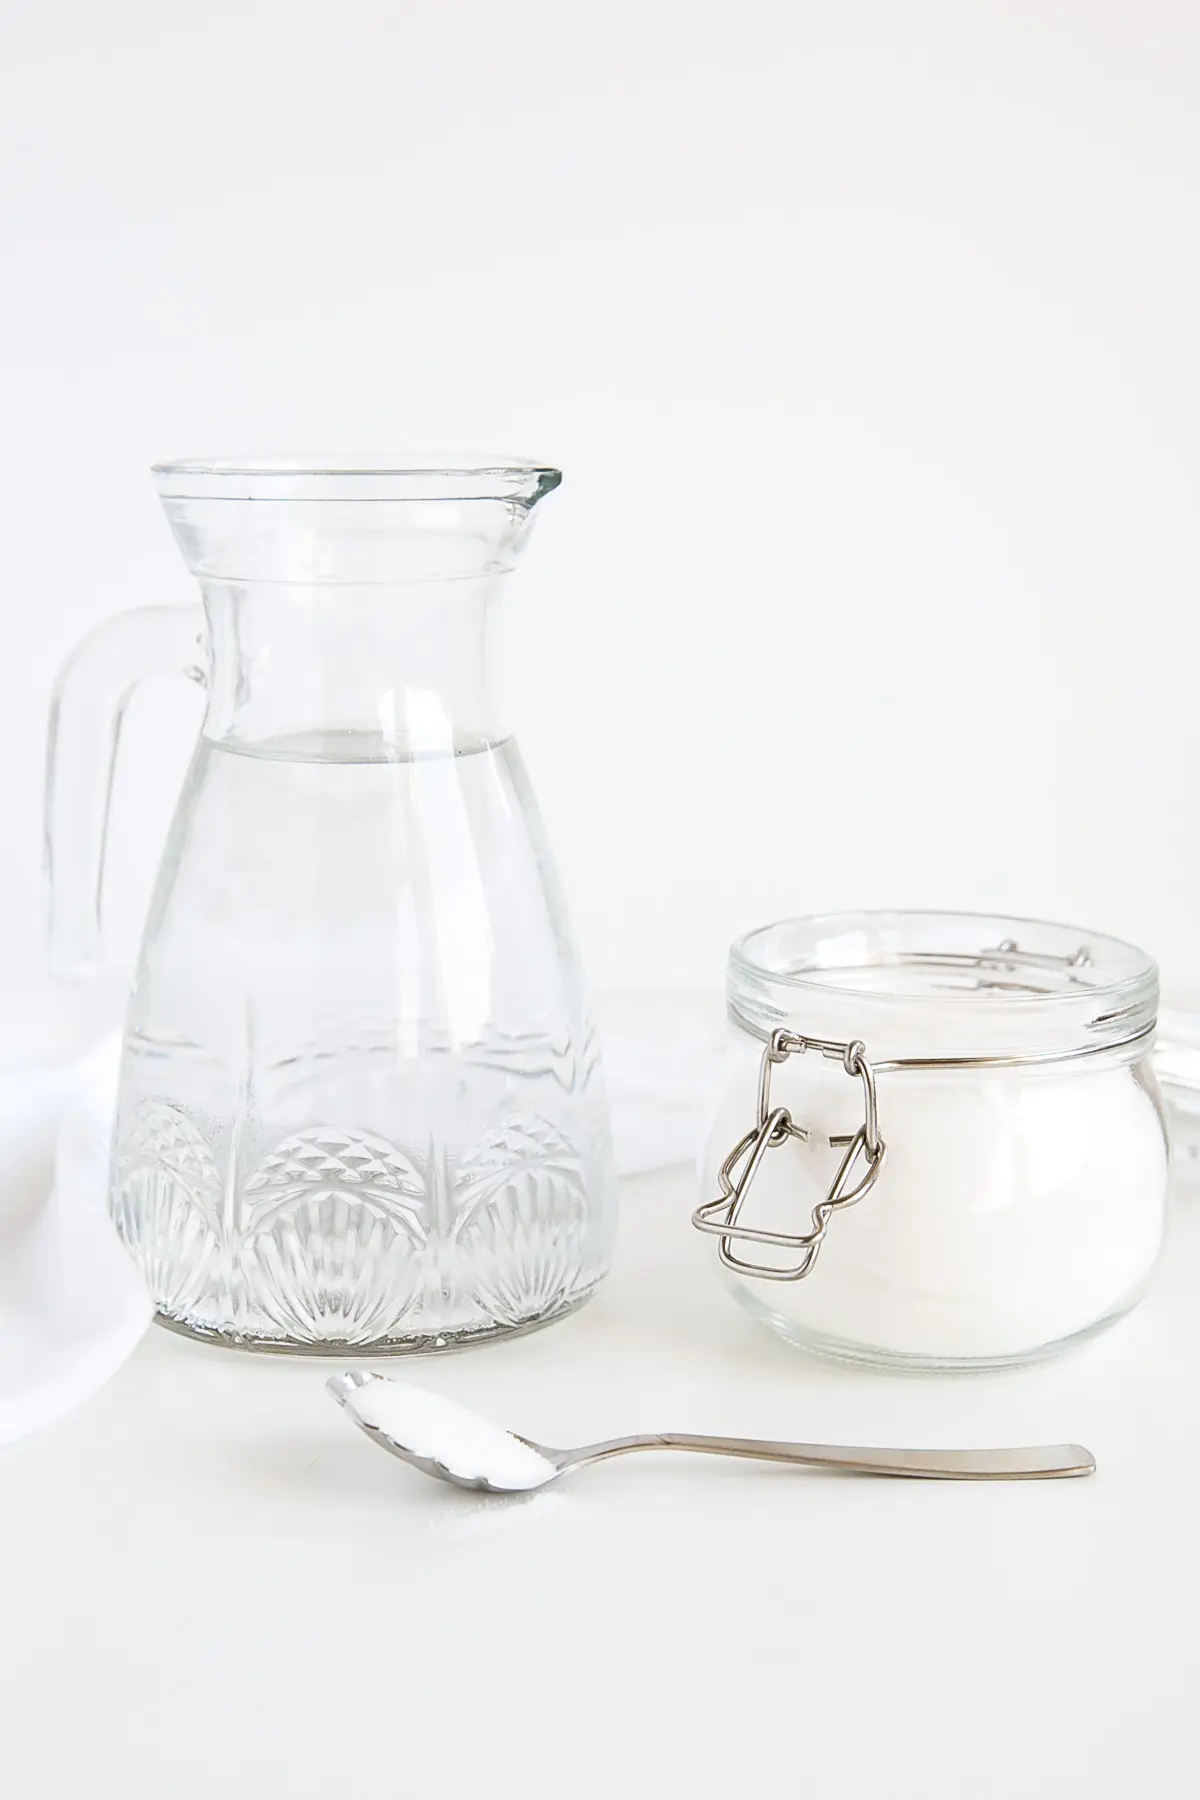 Make simple syrup by briefly cooking a sugar and water mixture.